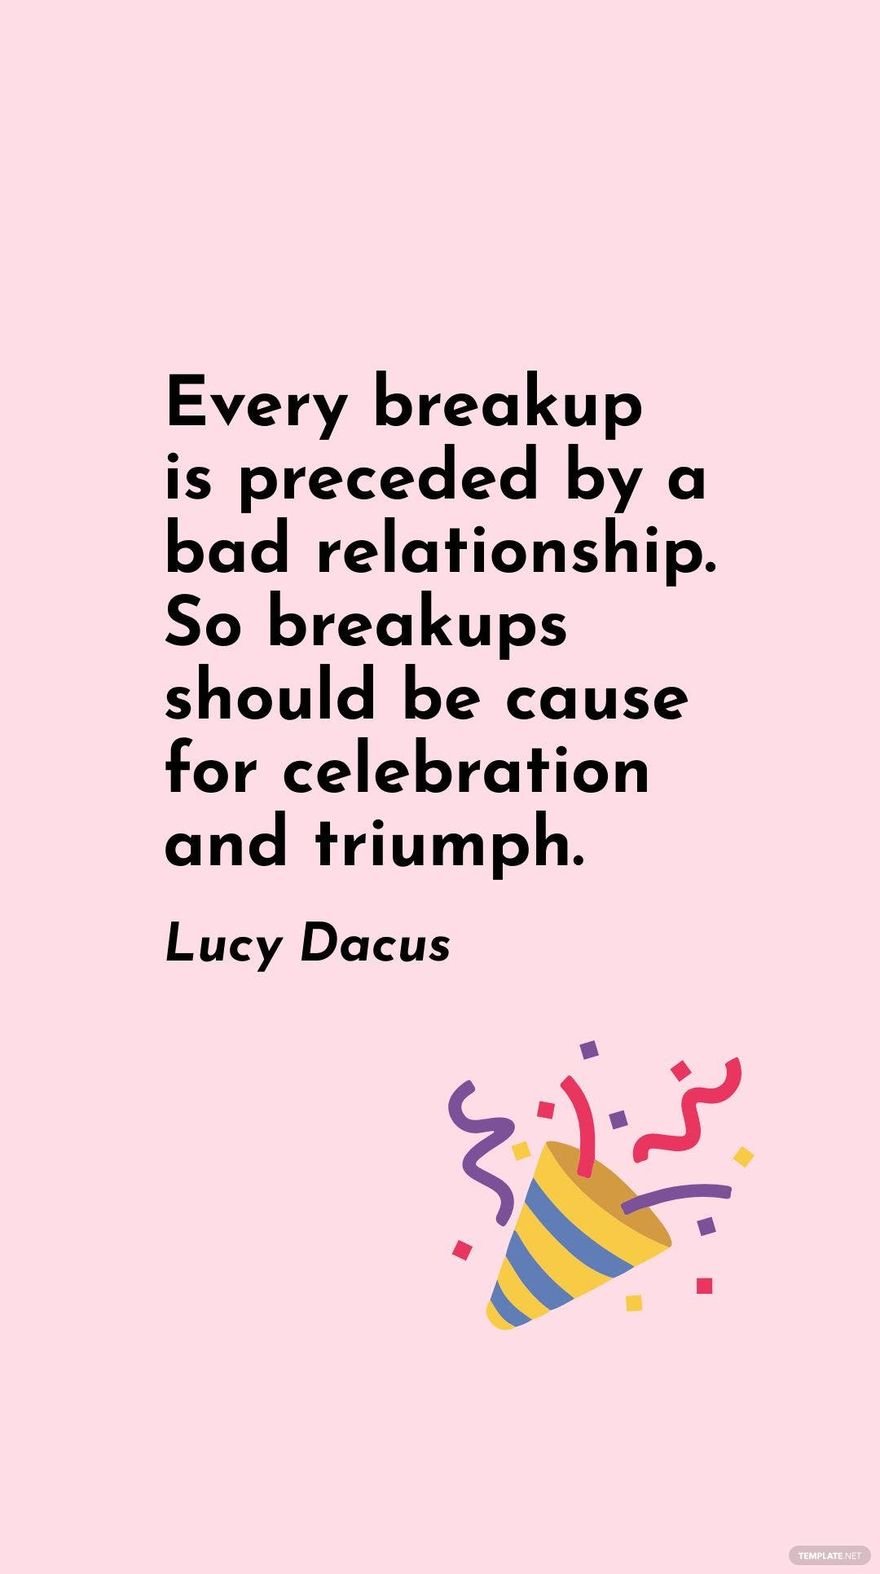 Lucy Dacus - Every breakup is preceded by a bad relationship. So breakups should be cause for celebration and triumph.